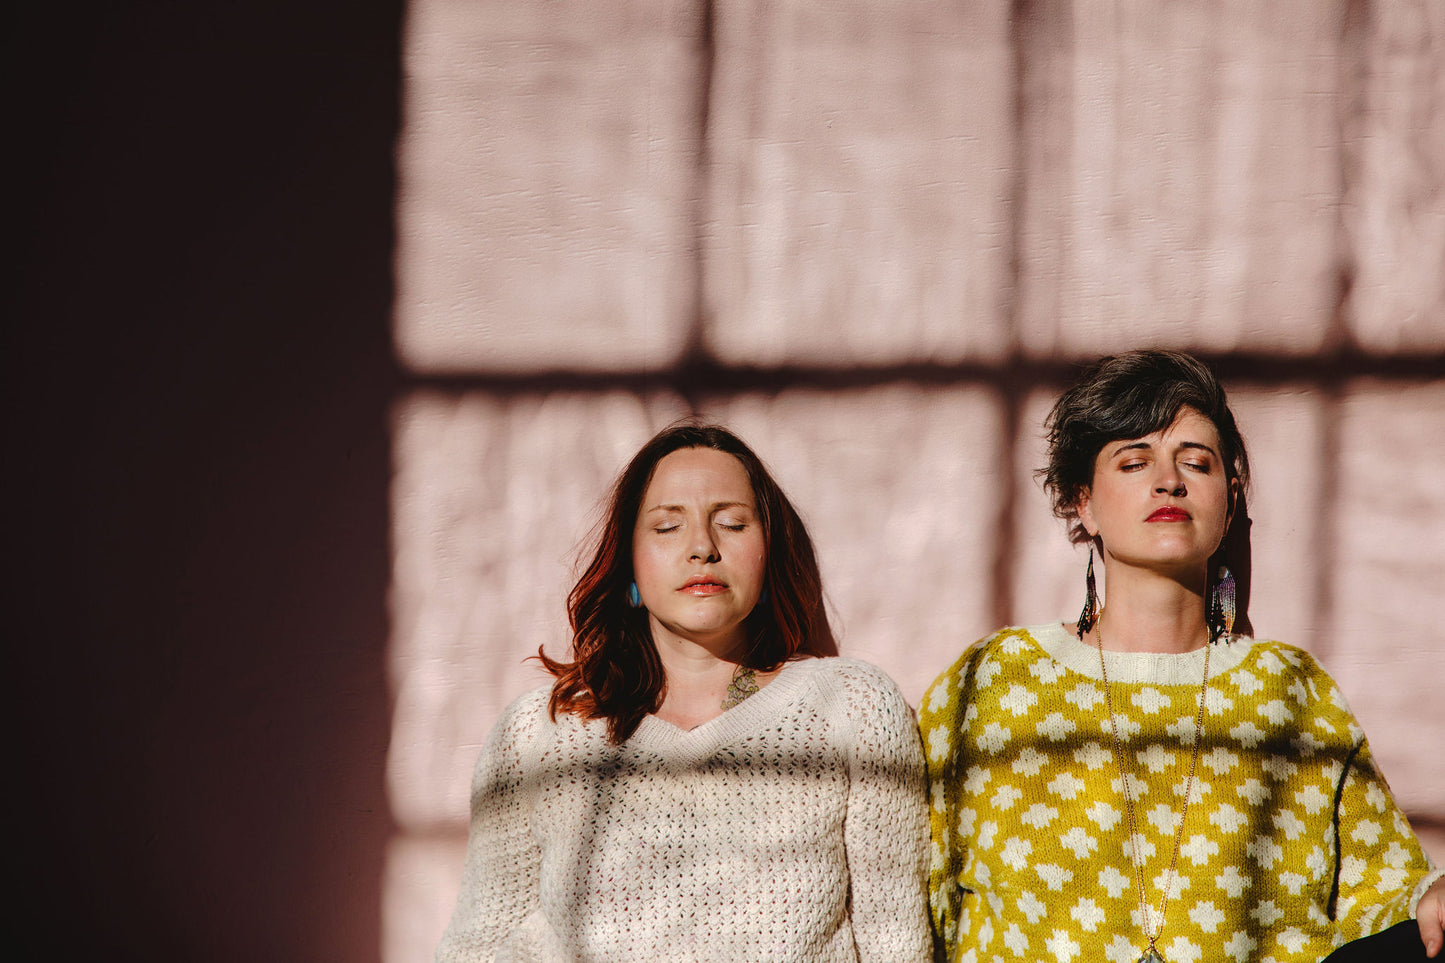 Bess and Jen stand outside, facing towards the sun. Bess wears a cream colored knit sweater (the Mary Raglan). Beside her, Jen wears a yellow and white knit sweater with a plusses pattern (the Plusses sweater).